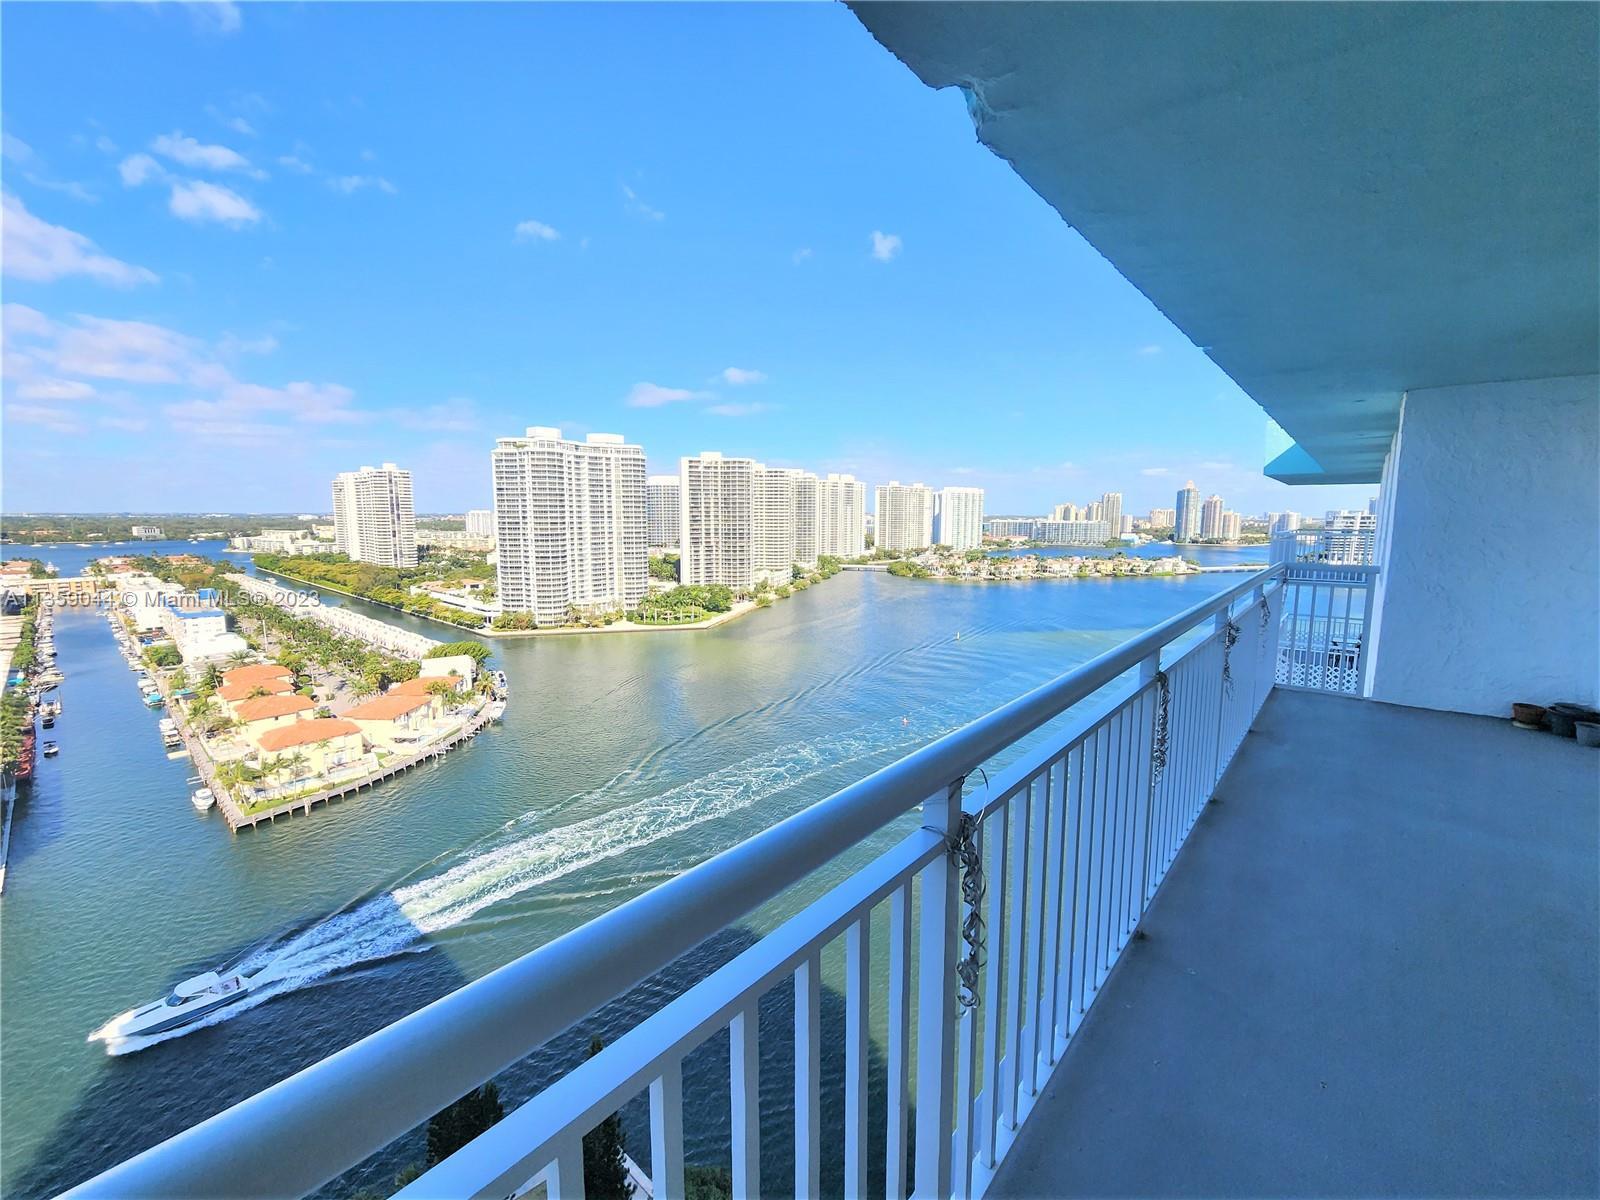 Enjoy the best of both worlds with this incredible penthouse condo - Enjoy breathtaking views and pl